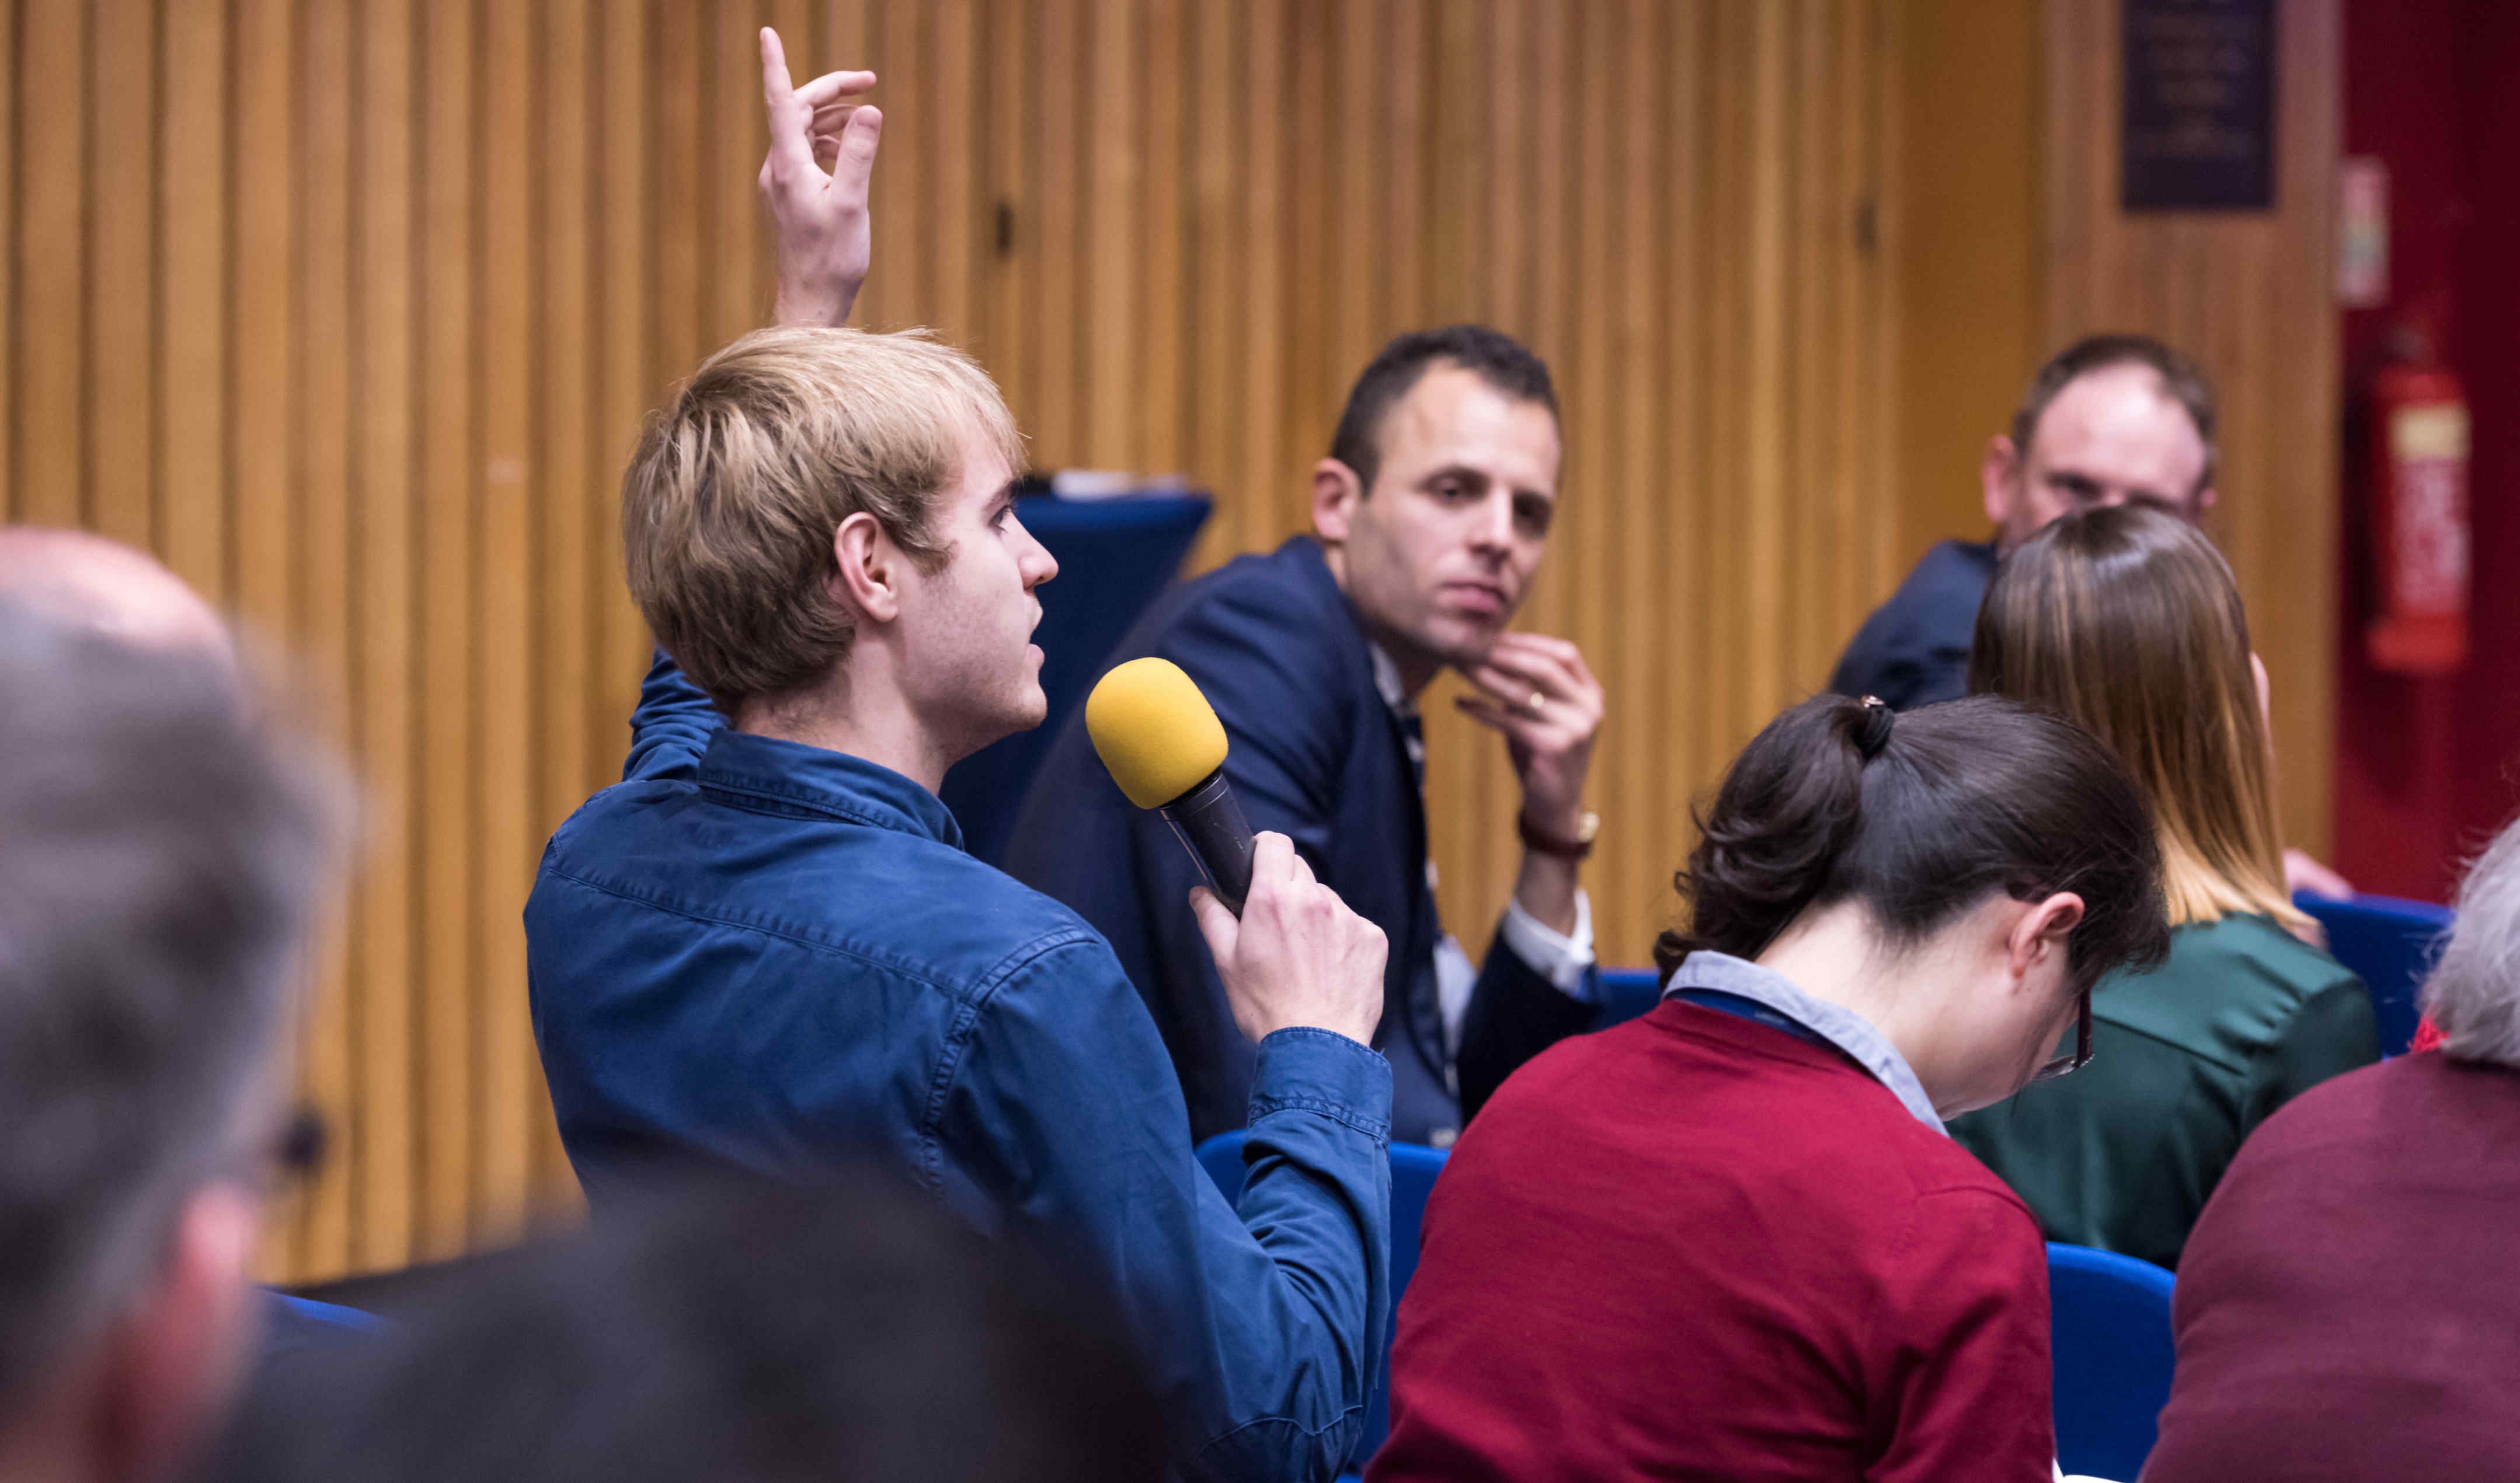 Members of the audience were encouraged to ask questions of the panels.